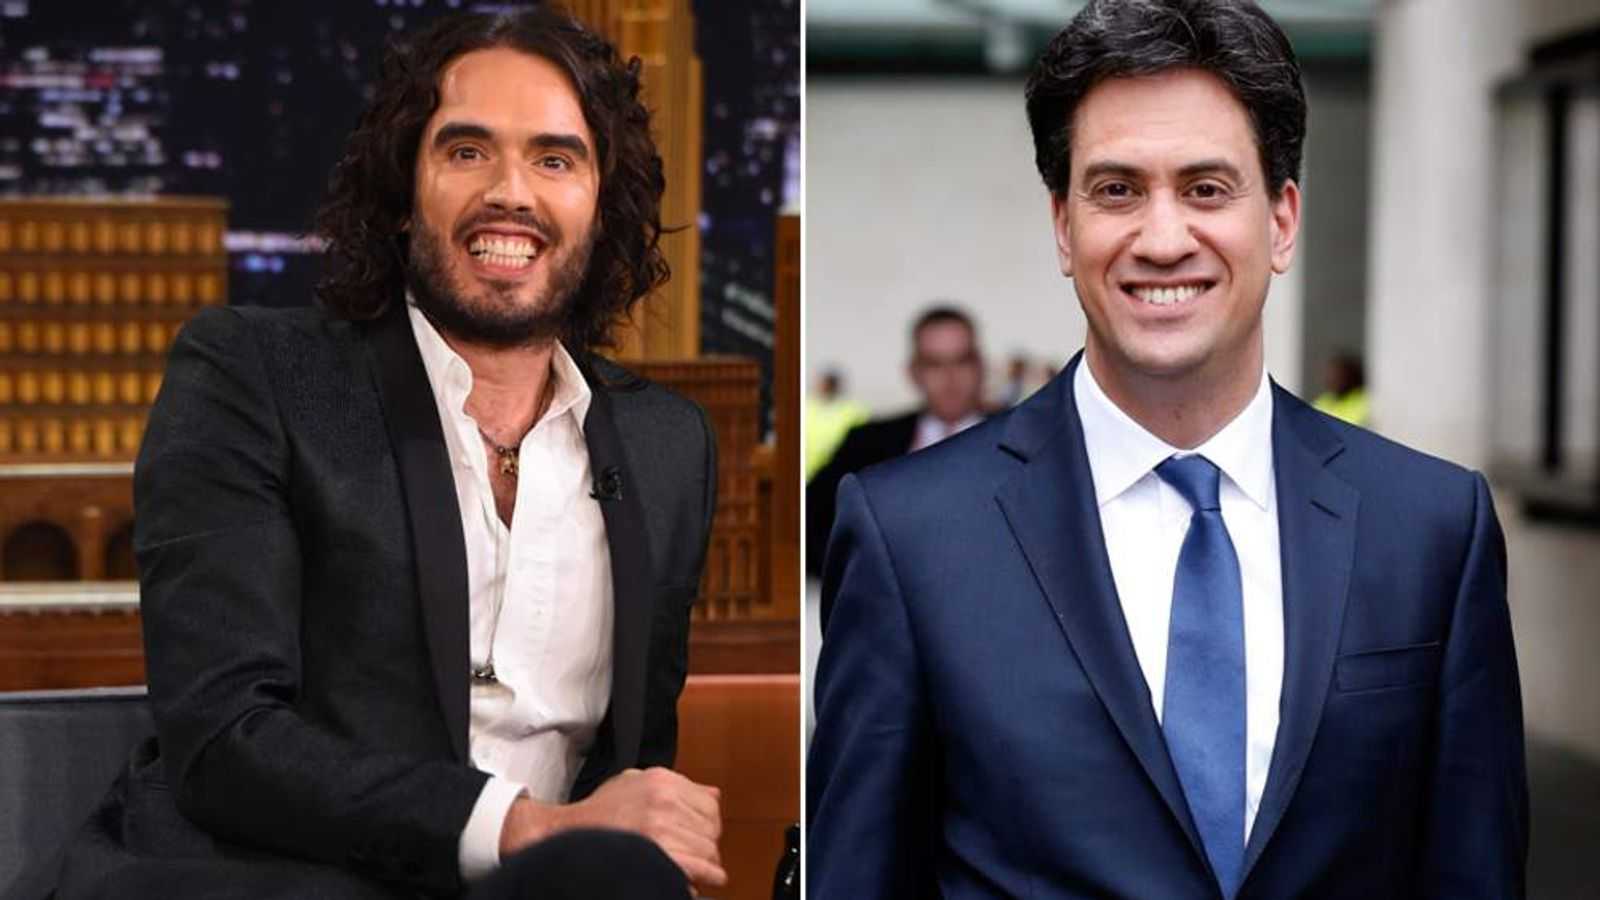 <p>Russell Brand and Ed Miliband</p>
<p></p>